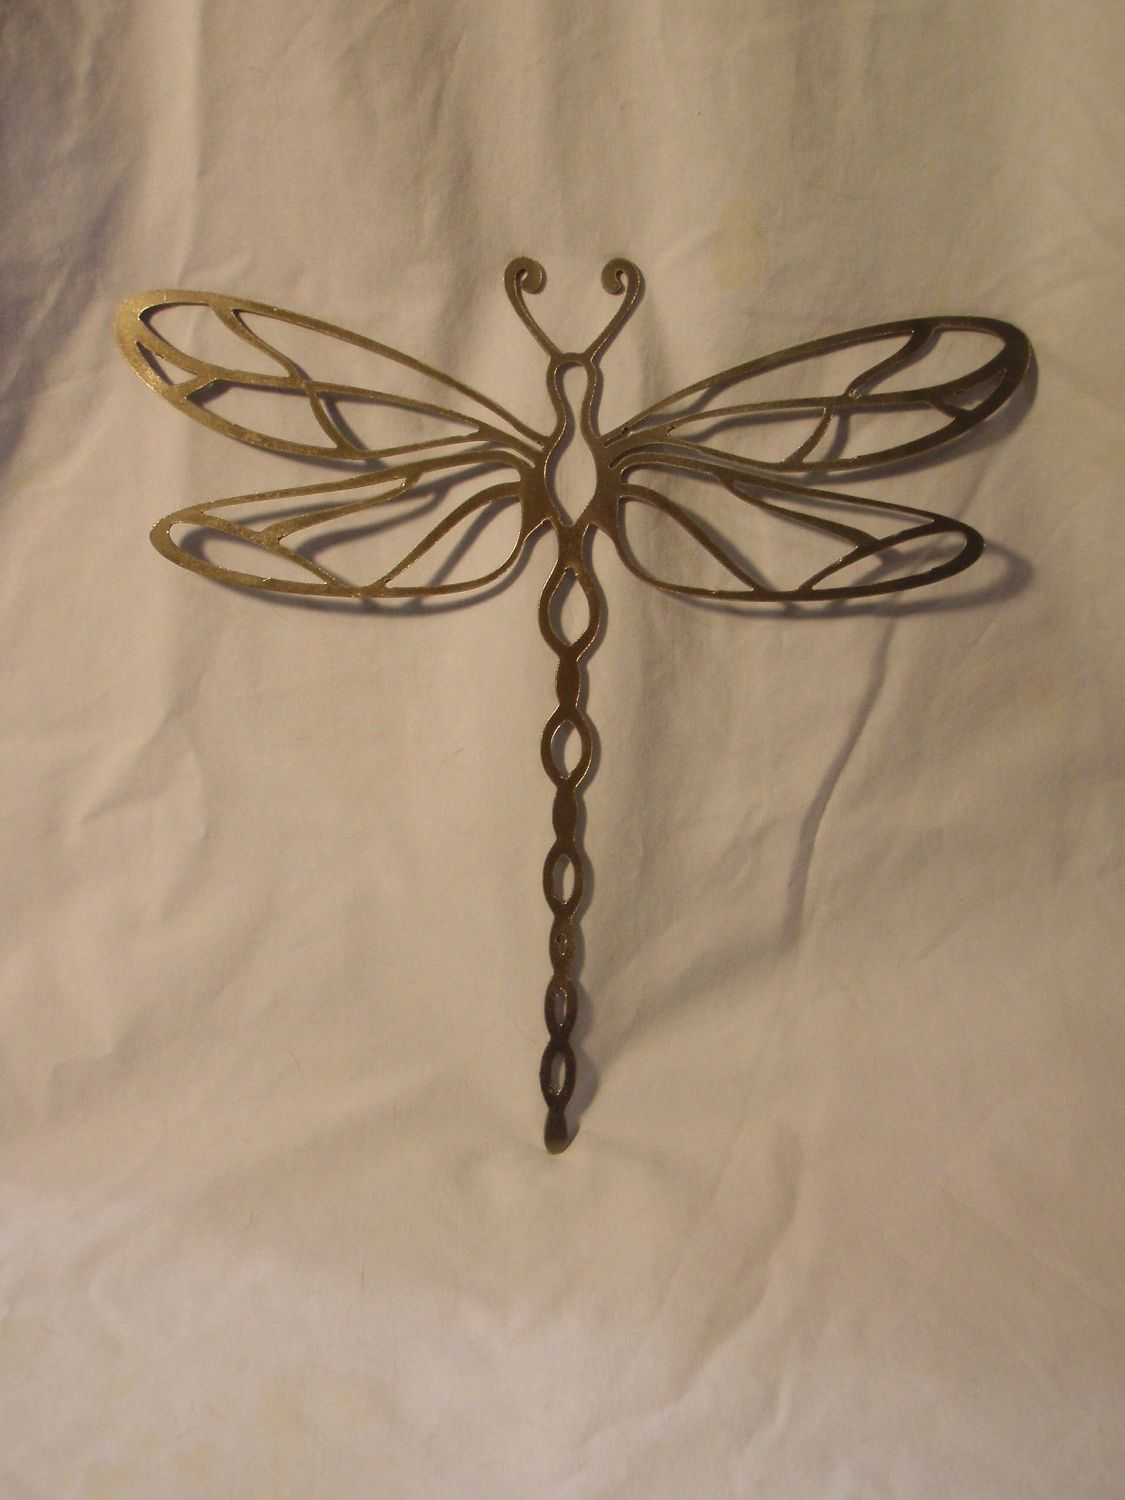 Dragonfly 3d Wall Art Intended For 2017 Wall Art Designs: Dragonfly Wall Art Metal Dragonfly Wall Art (View 1 of 15)